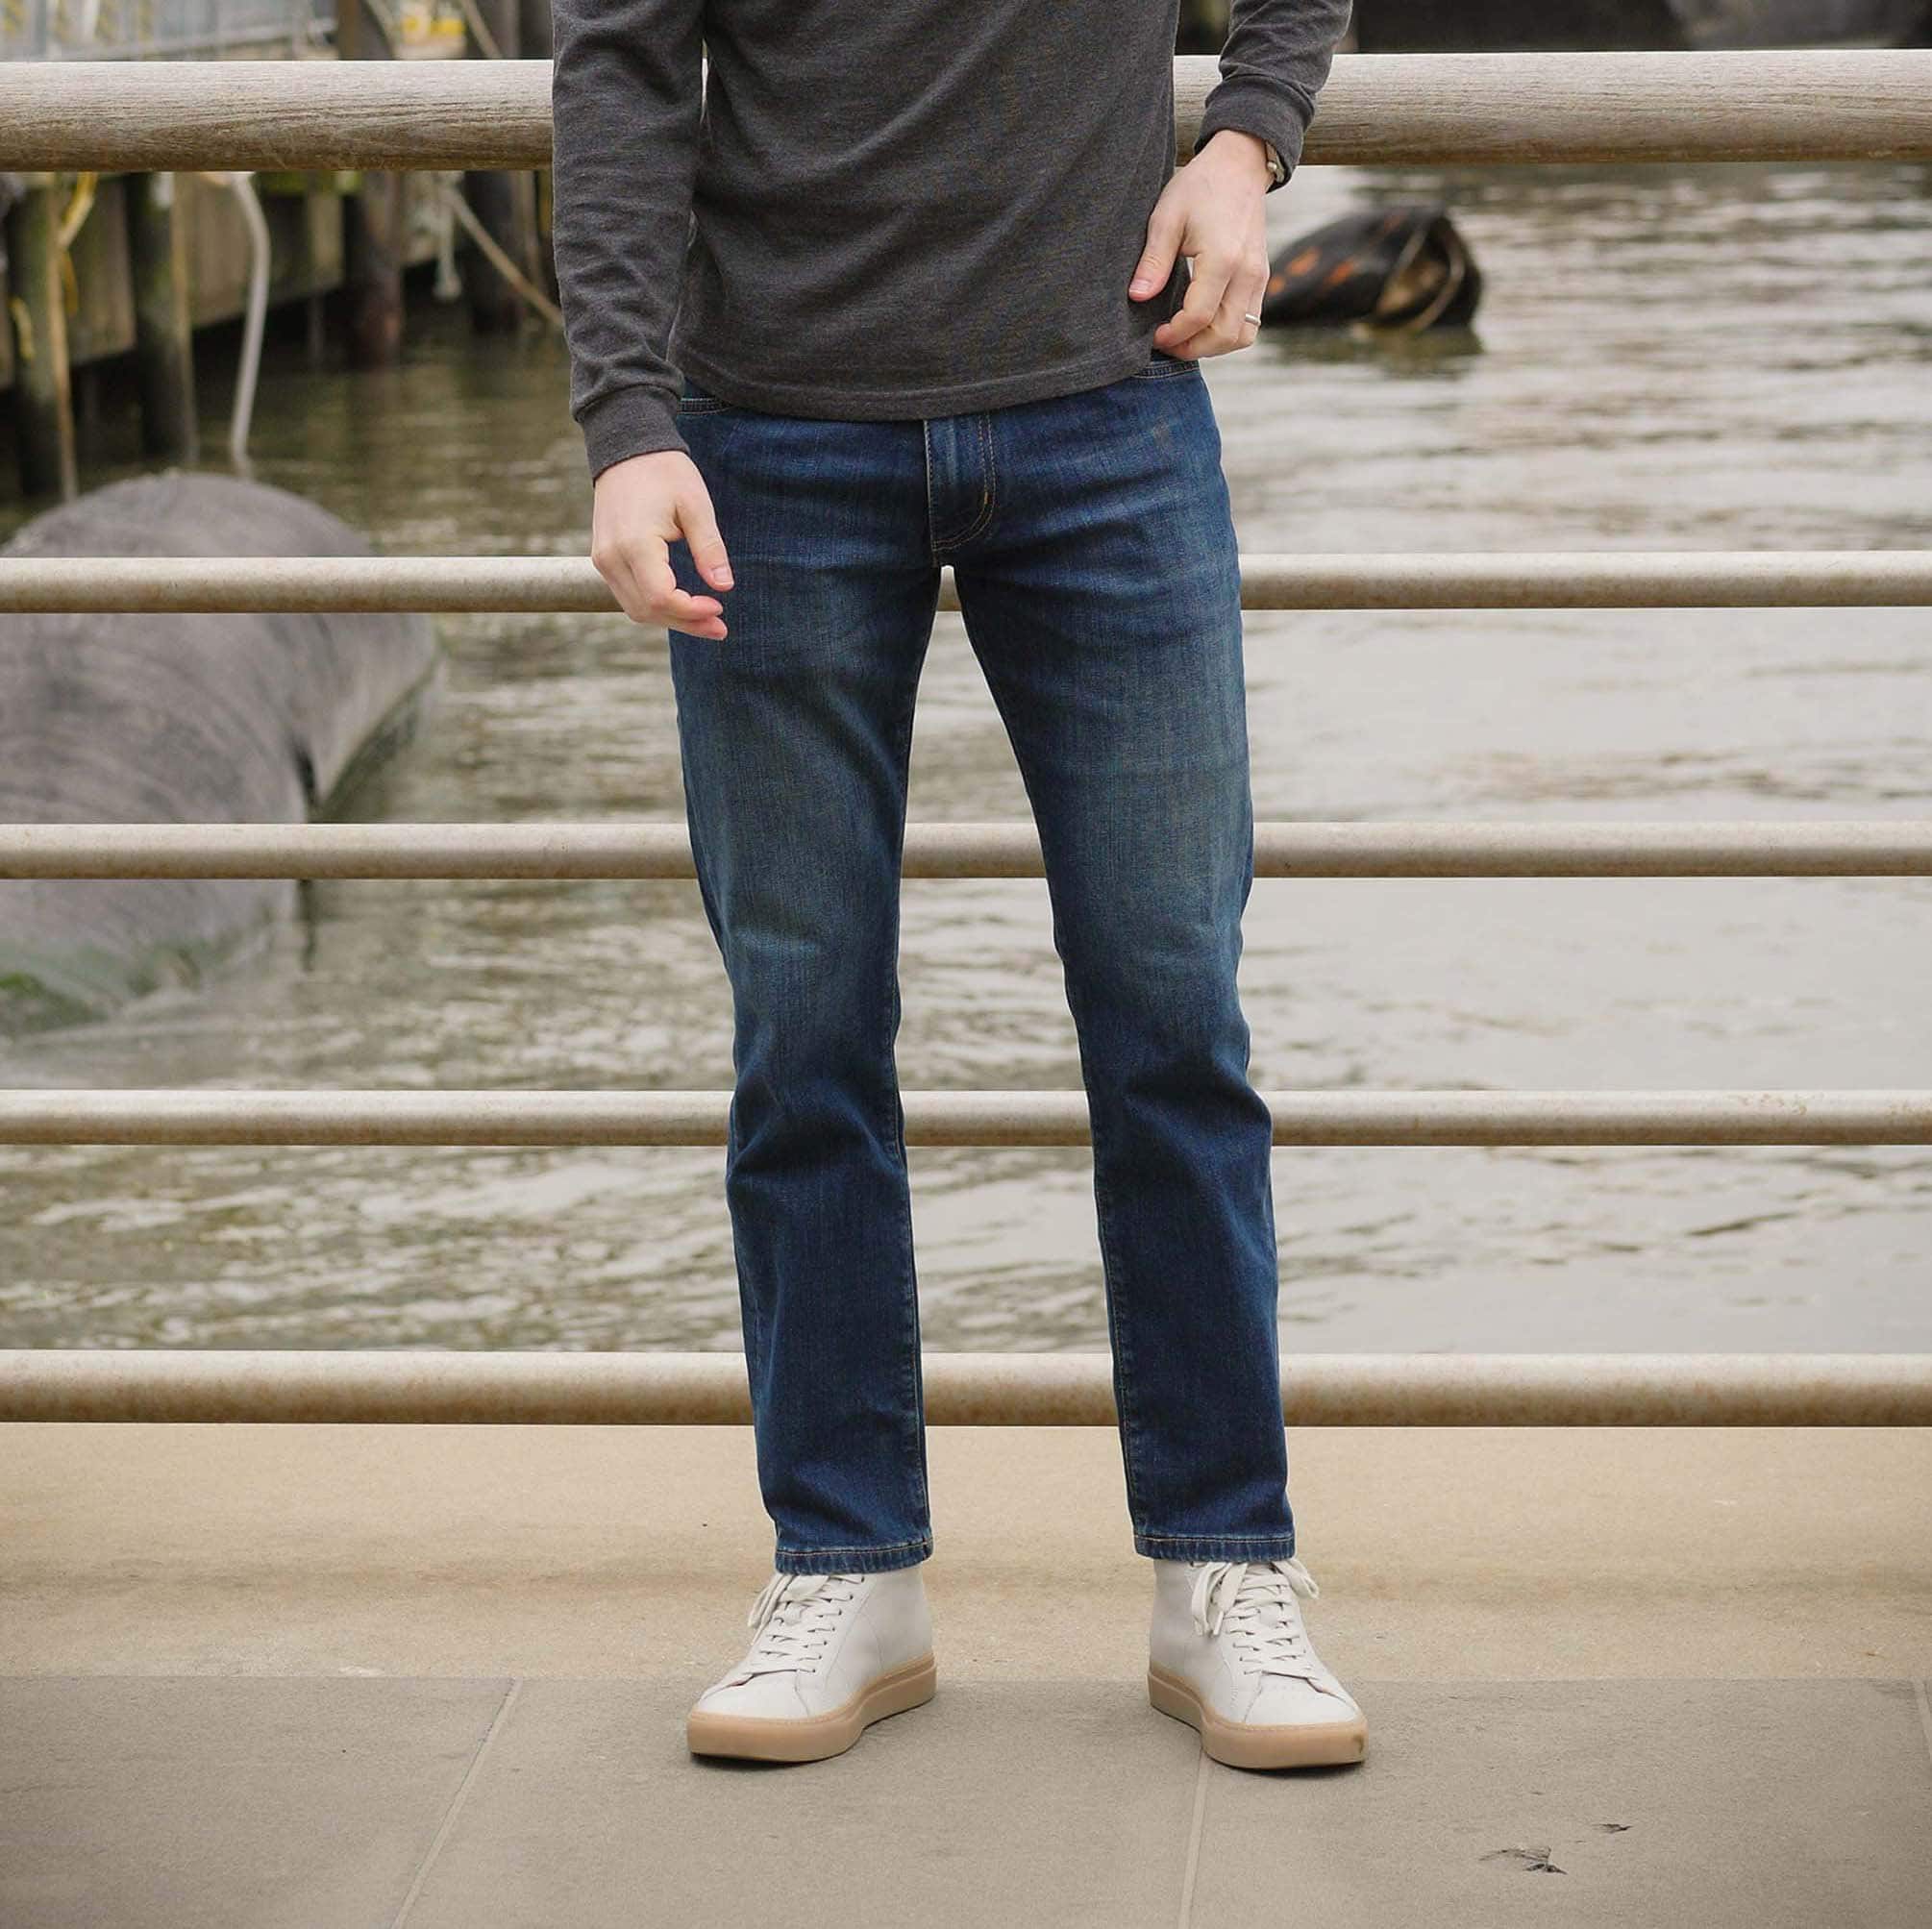 Reviewers Say These Men's Dress Pants Feel Like Sweats | HuffPost Life